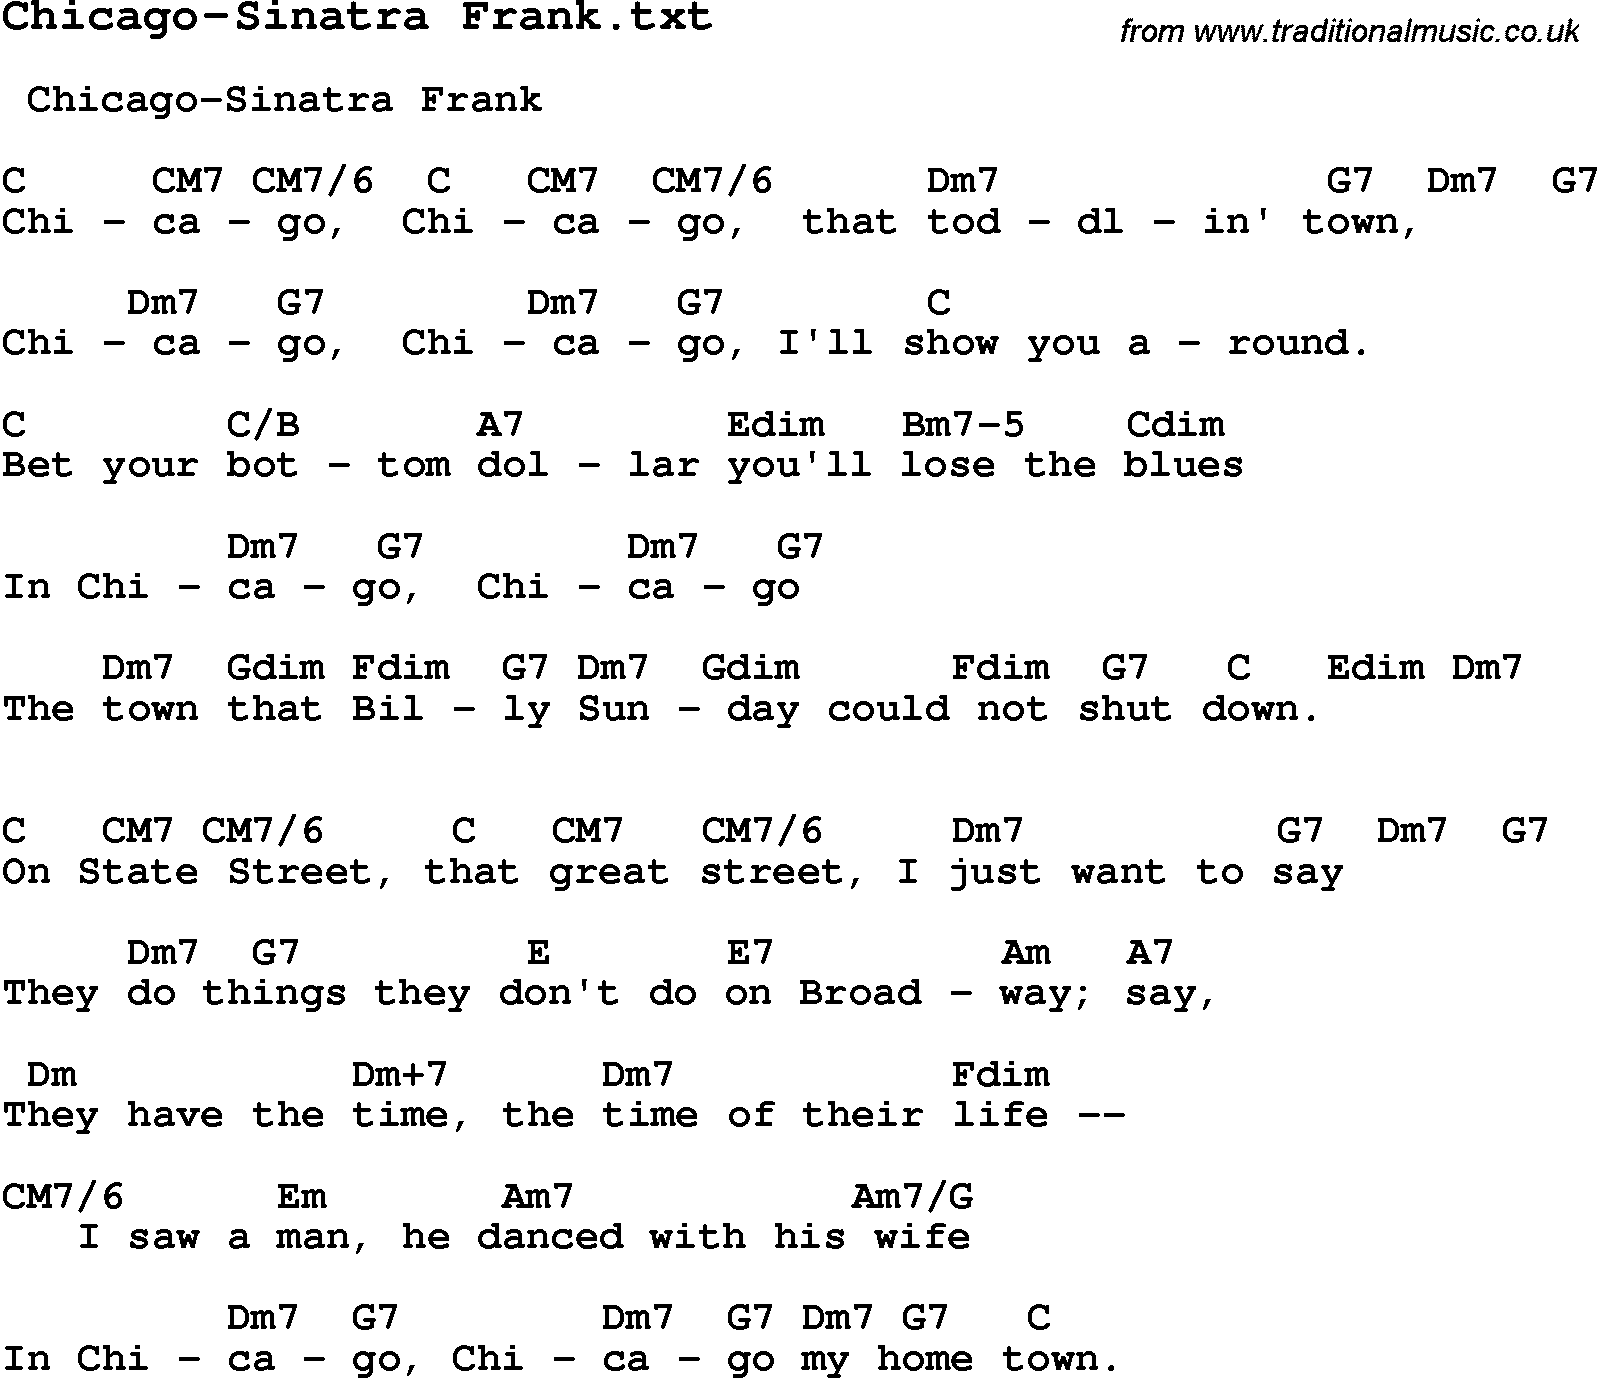 Jazz Song from top bands and vocal artists with chords, tabs and lyrics - Chicago-Sinatra Frank